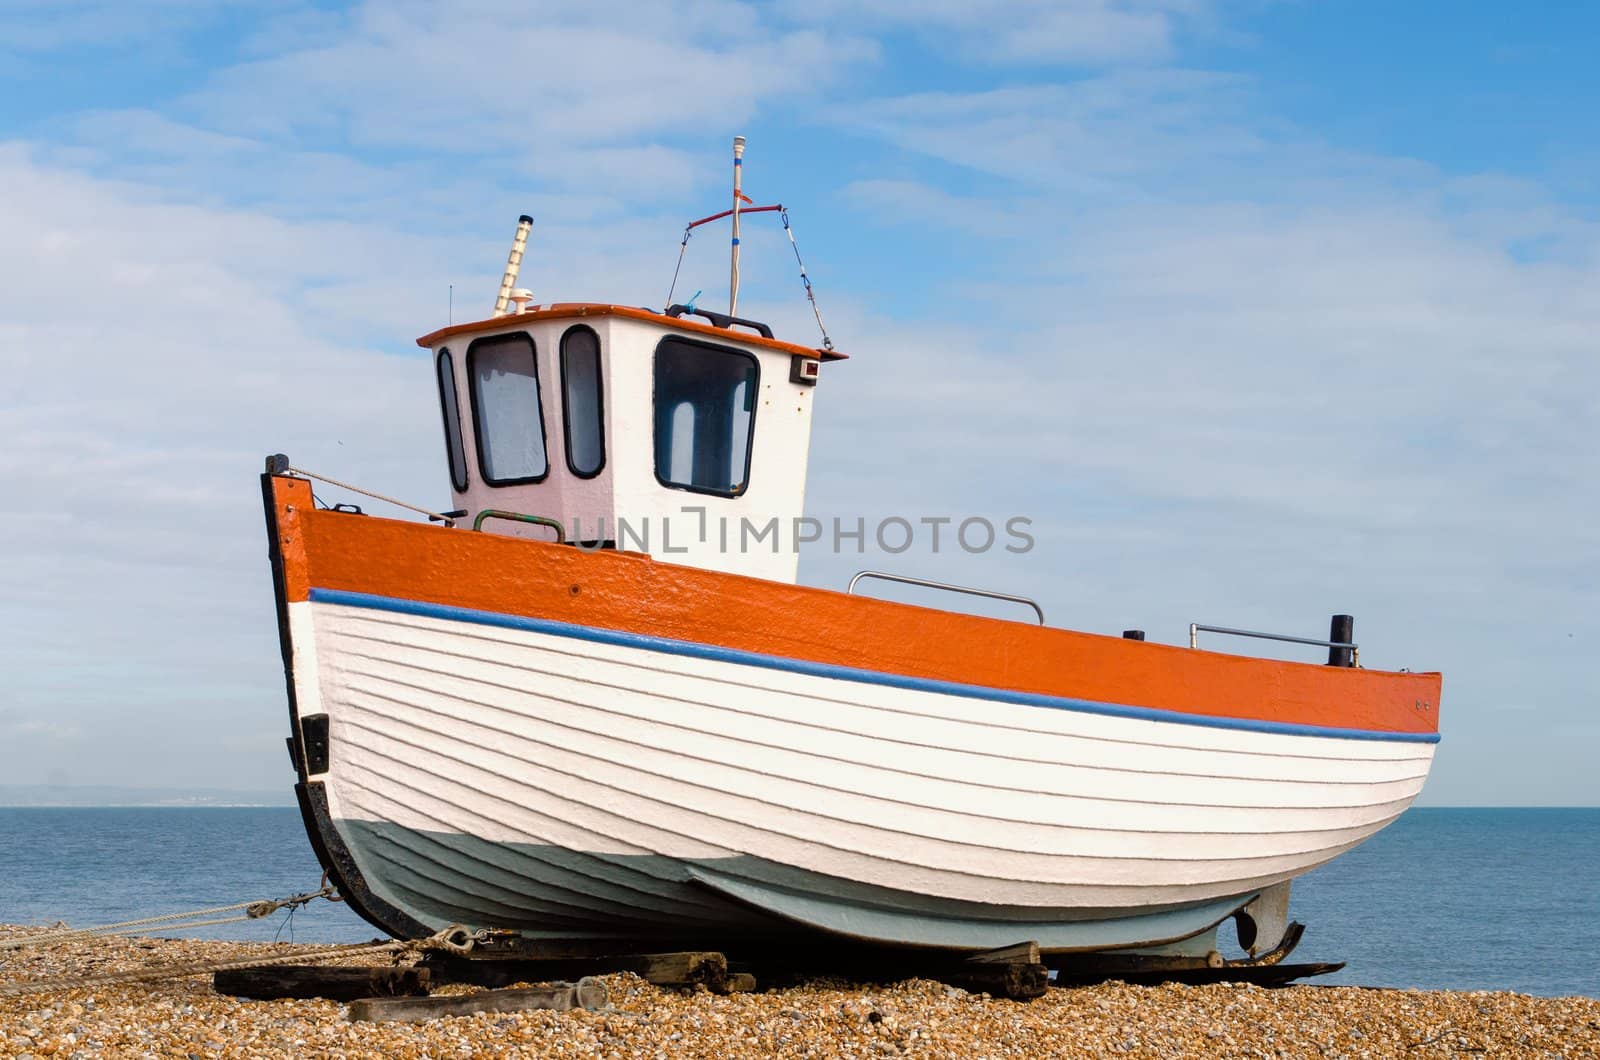 Boat on Dungeness beach